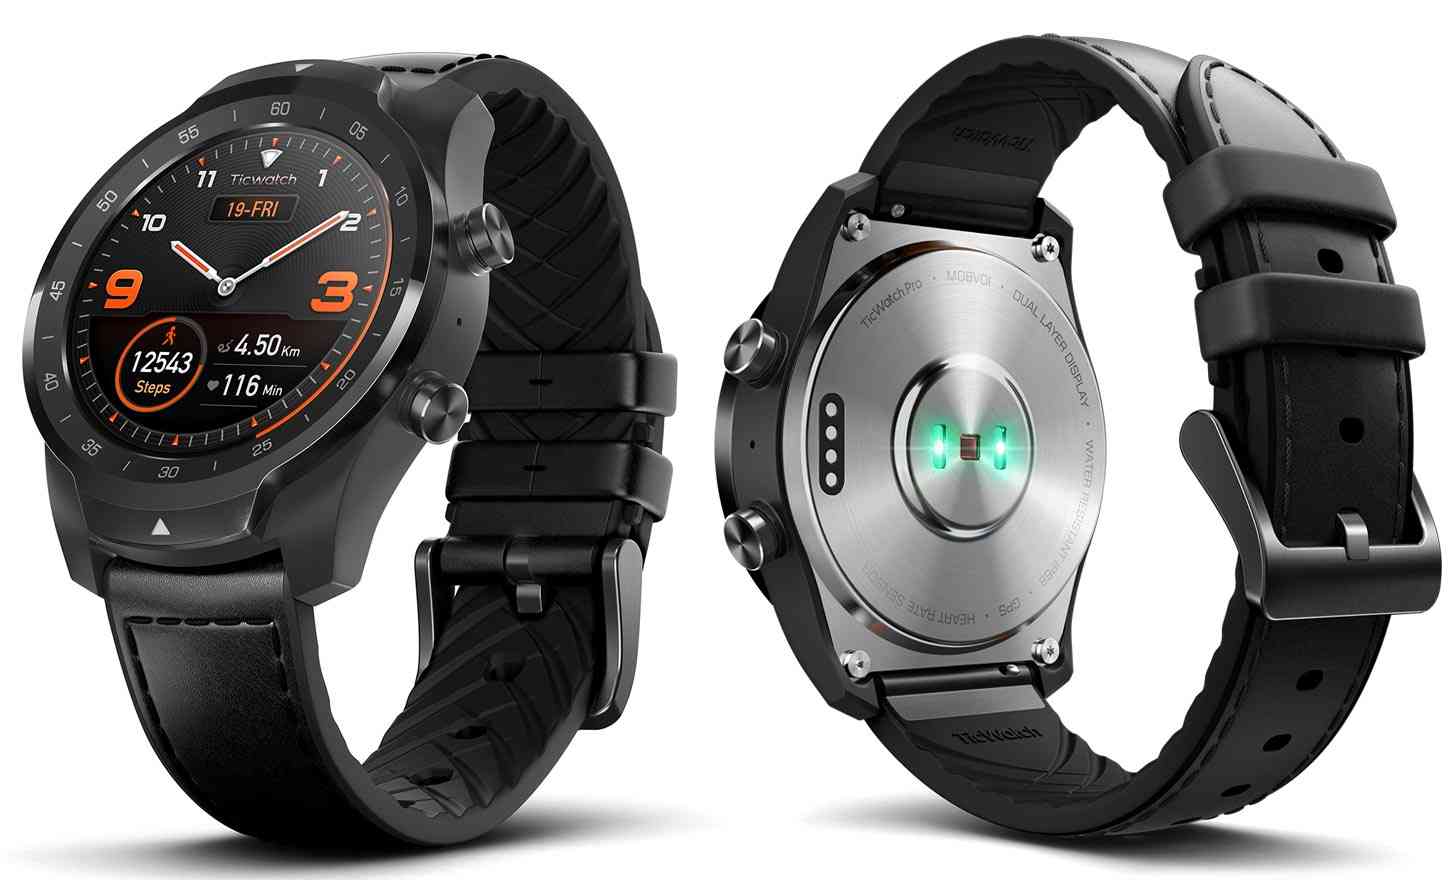 TicWatch Pro 2020 smartwatch official with double the RAM of previous model | News.Wirefly